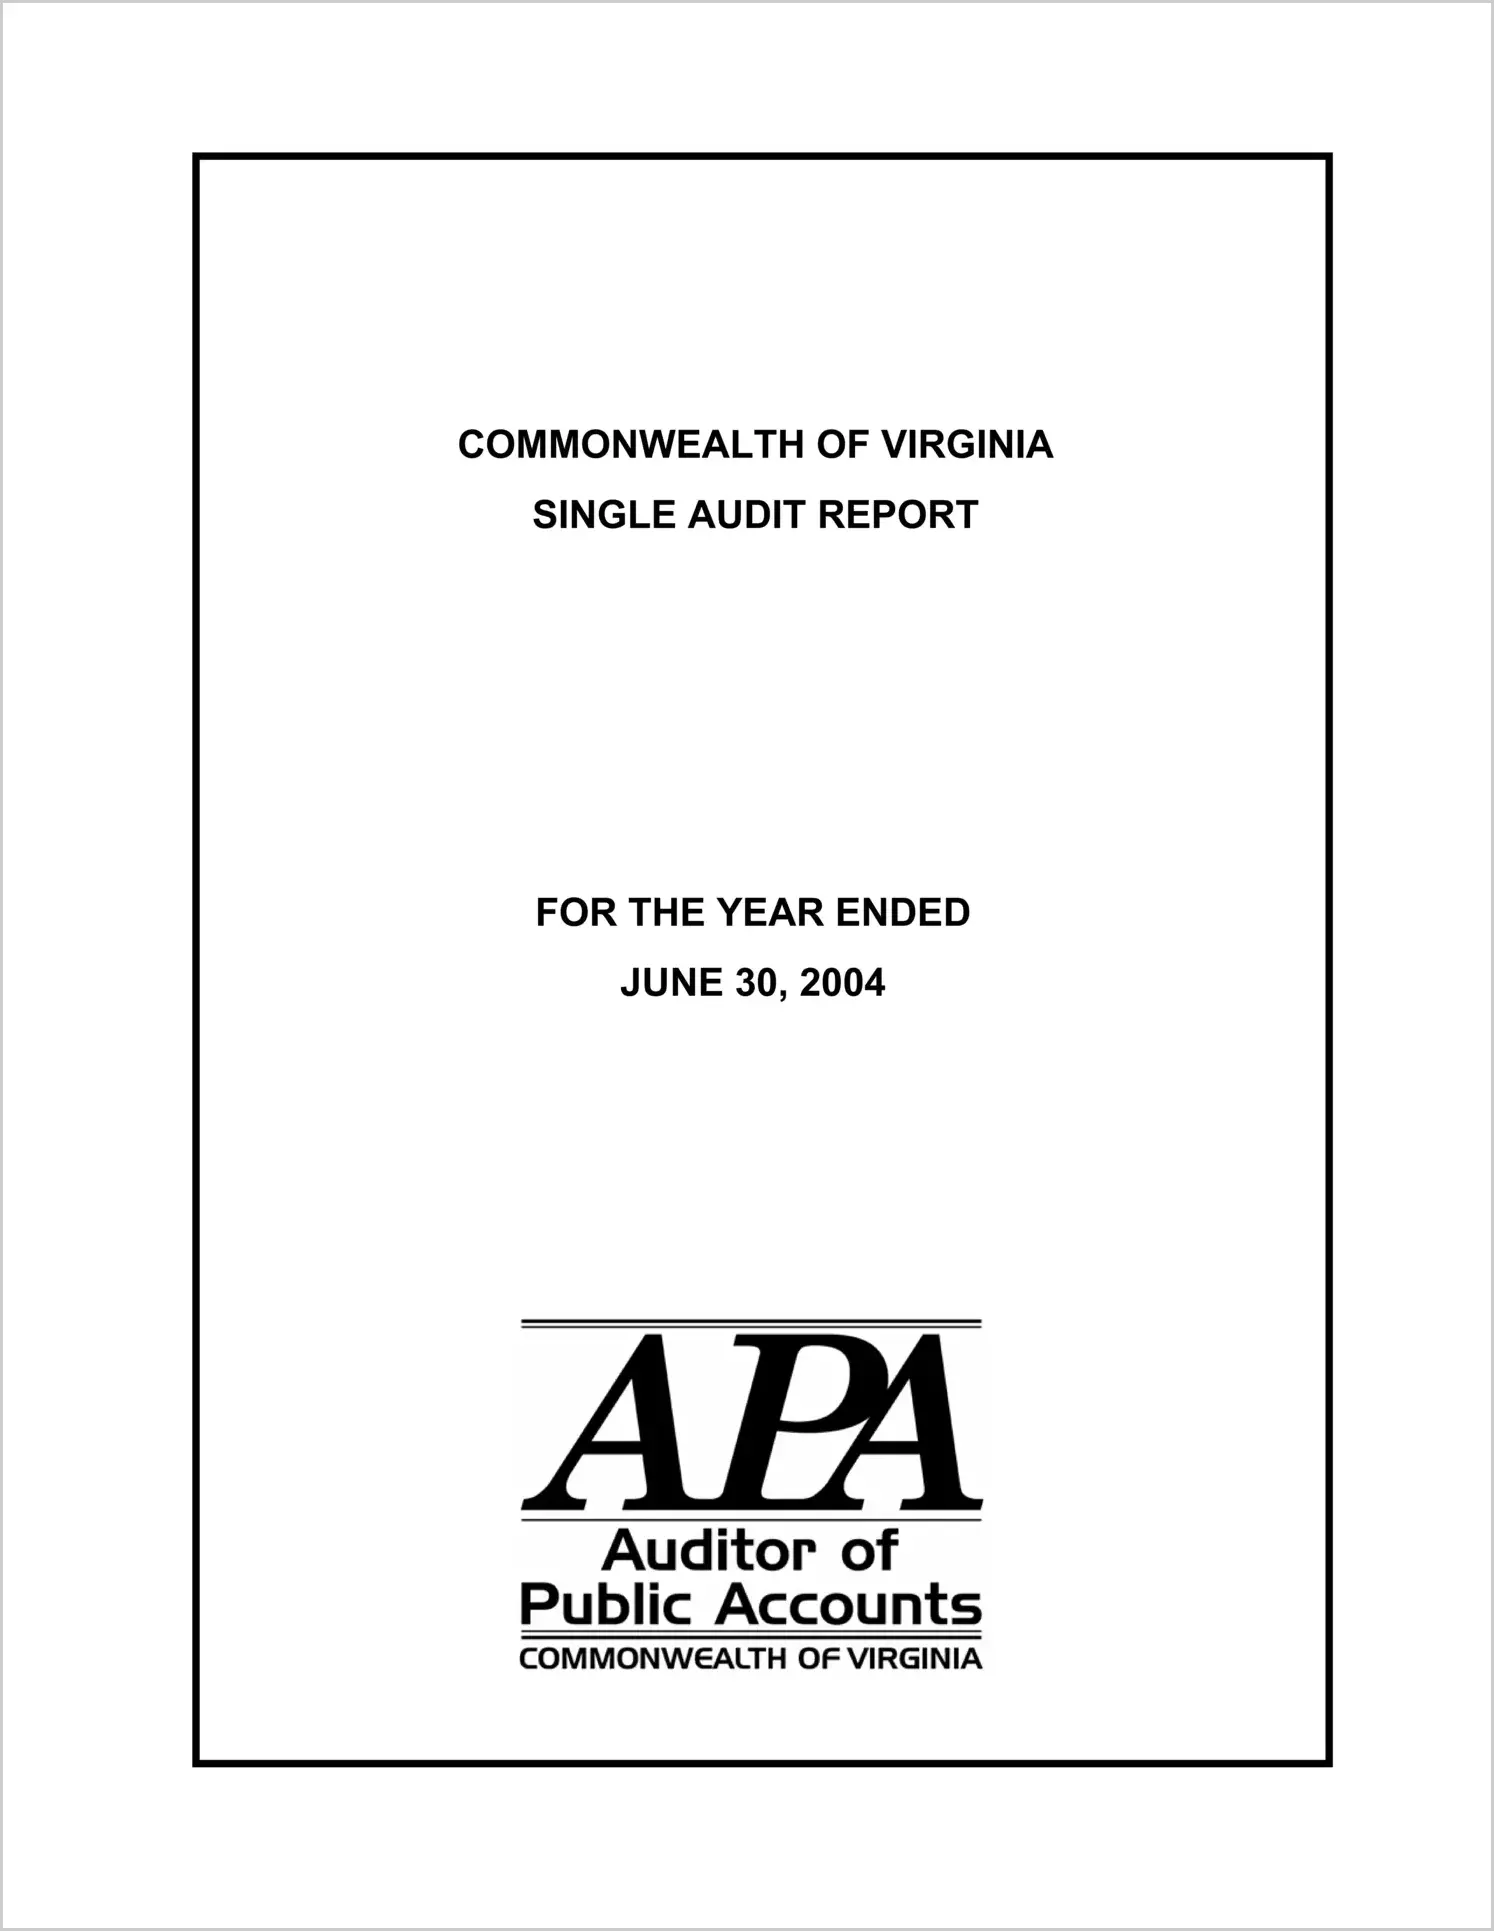 Commonwealth of Virginia Single Audit Report for the Year Ended June 30, 2004